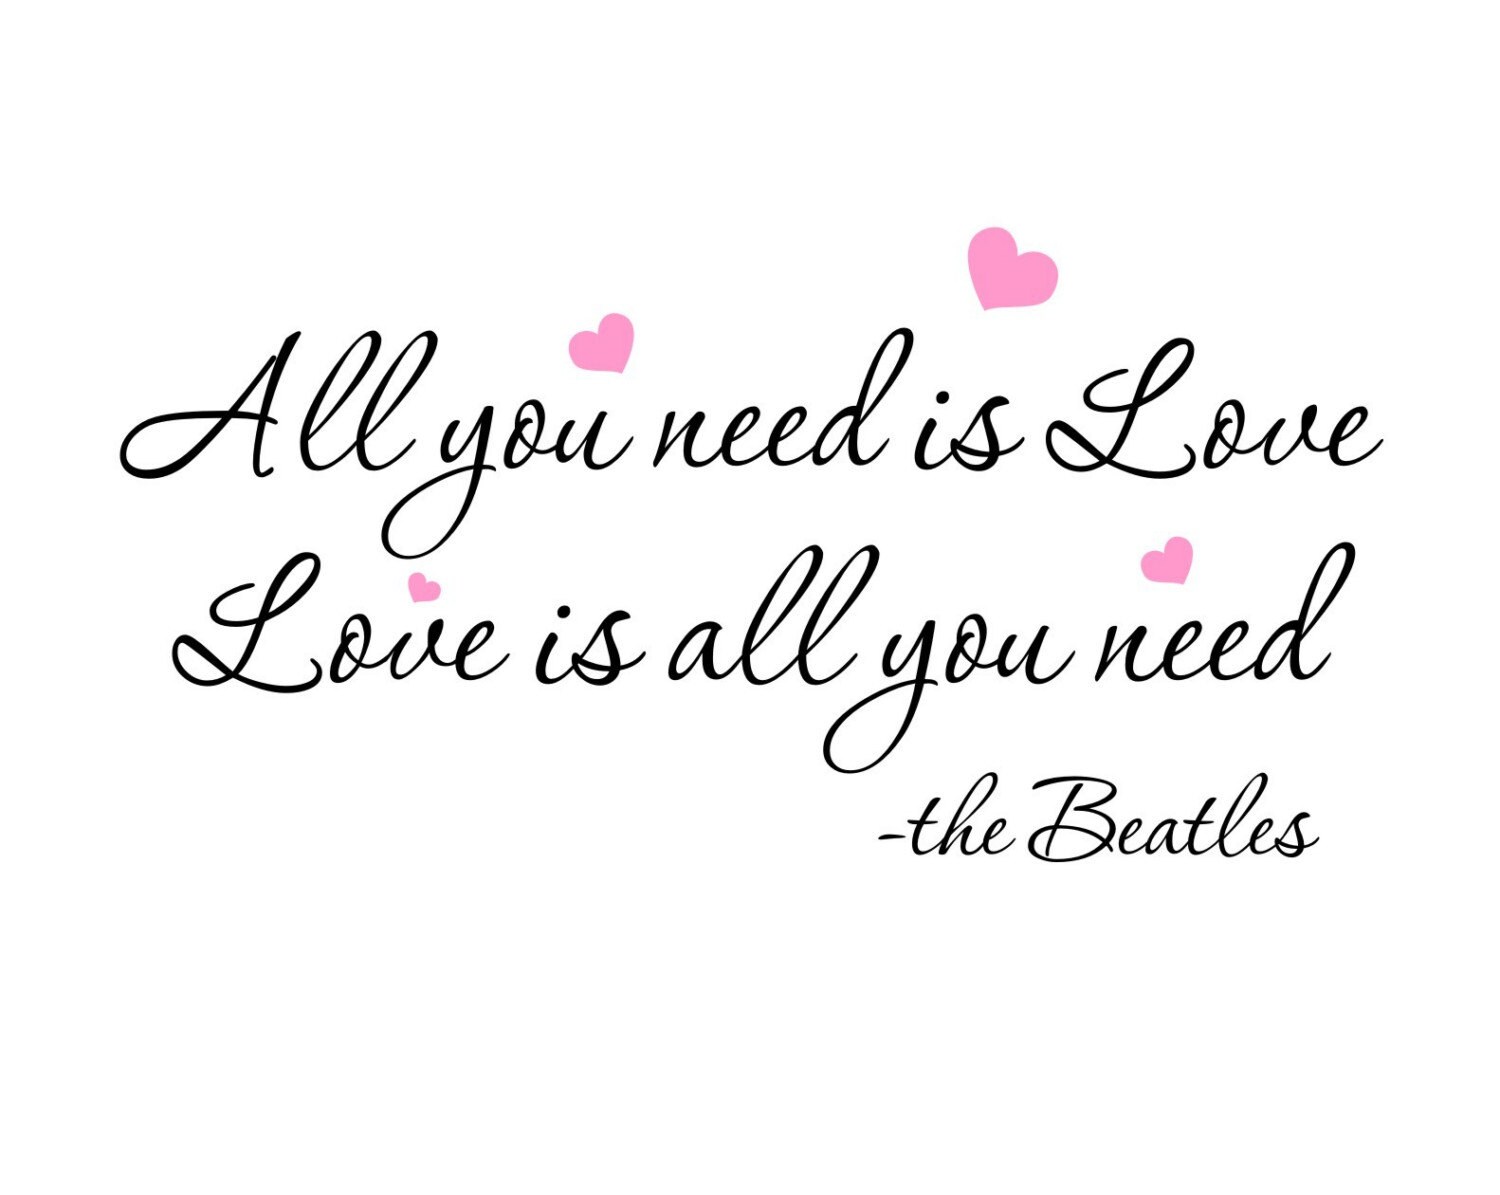 ...love is all you need (With images) | All need is love, All you need ...